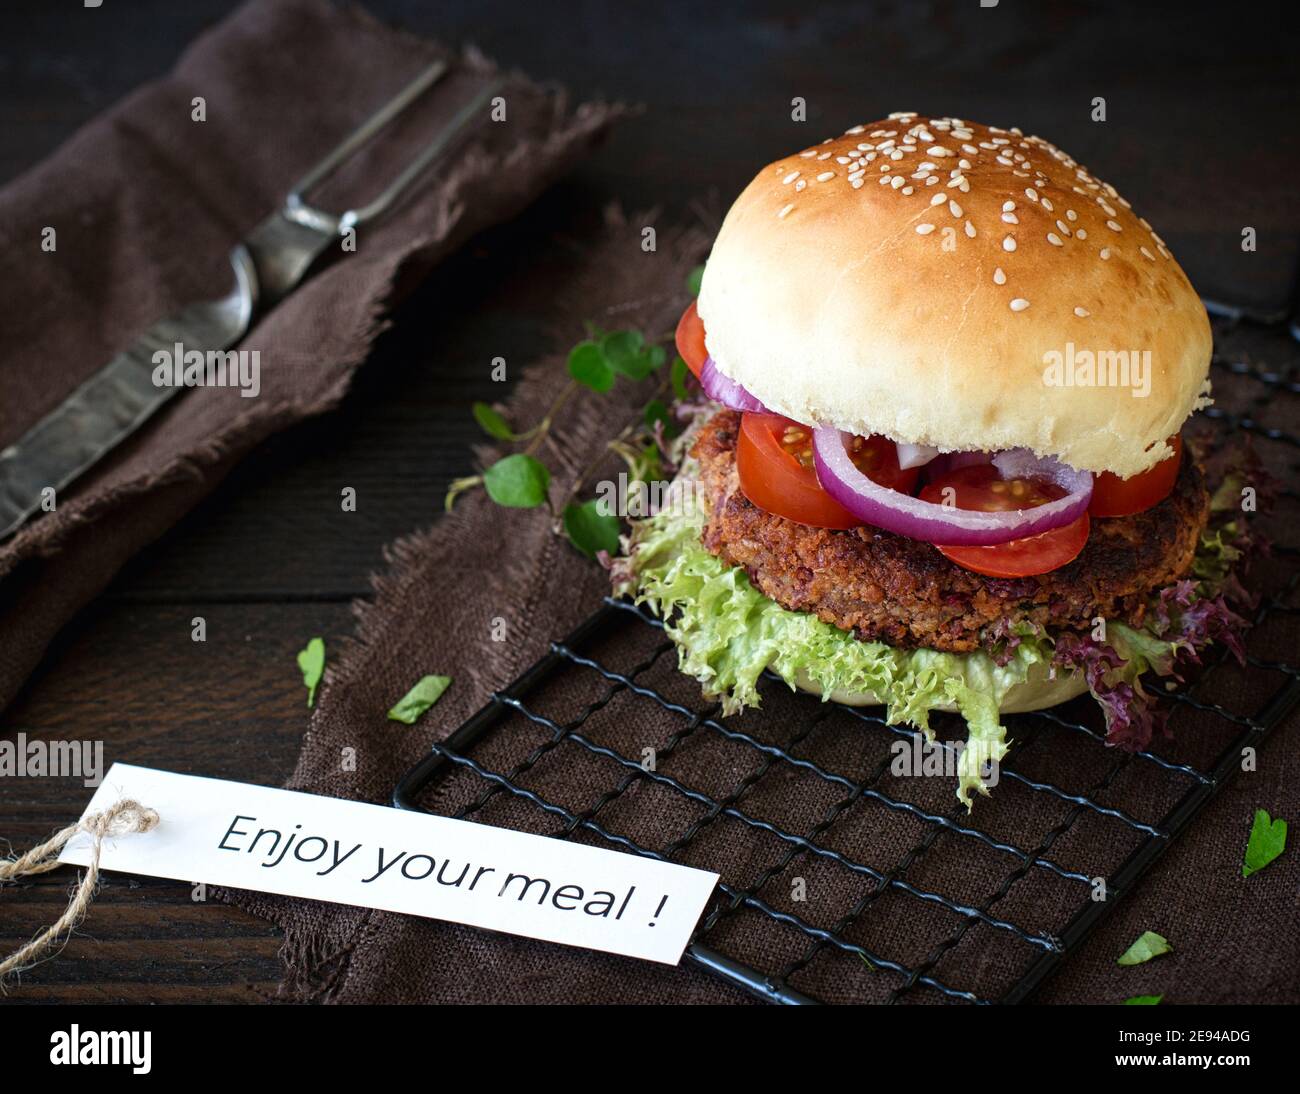 Homemade vegetarian cheese burger on a dark wooden board on a dark brown wooden table, with frensh fries, next to it a brown linen napkin, next to it Stock Photo